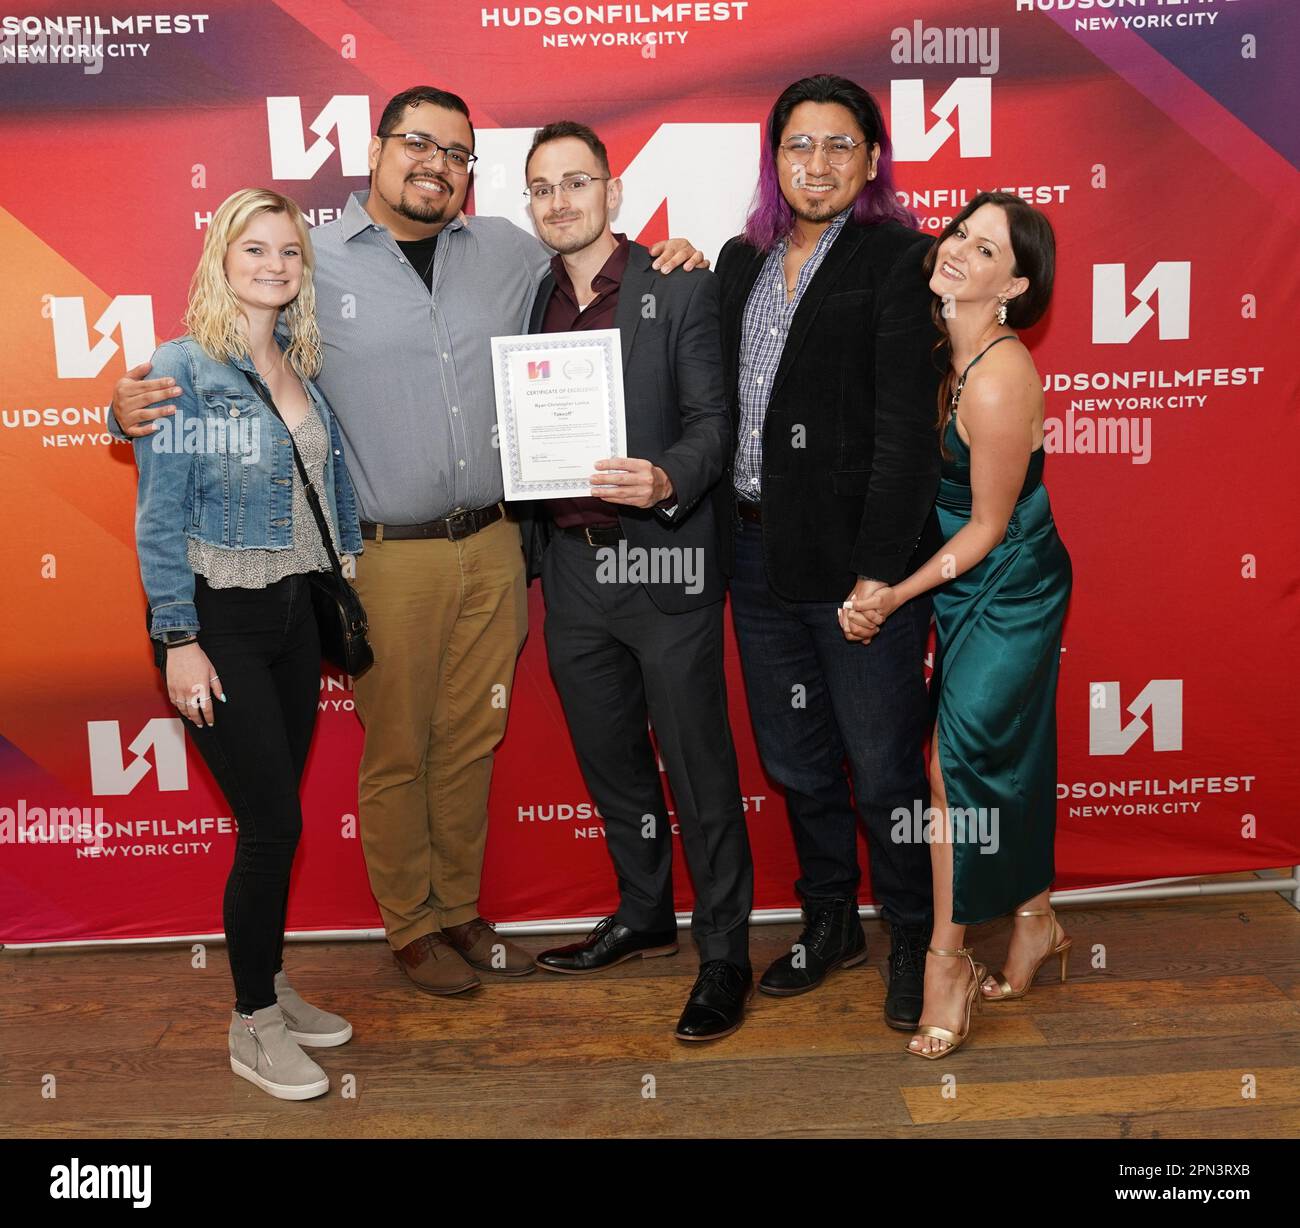 April 16, 2023, New York, New York: (NEW) Hudson International Film Festival in New York. April 15, 2023, New York, USA: The Hudson International Film Festival took place from April 13 to 15 in New York. The Best Film of the Year Award was presented to ''ACTIVISMO, '' Dissidence in Cuba, Directed by Philip Sugden and Carole Elchert. This is a documentary film about Cuban Artist use art as Activism. The Top Movie Award was presented to ROBIN HOOD, Directed by Leslie Kincaid Burby. There was the presence of Marc Marlon, the founder and president of Hudson Film Festival and many other artists lik Stock Photo